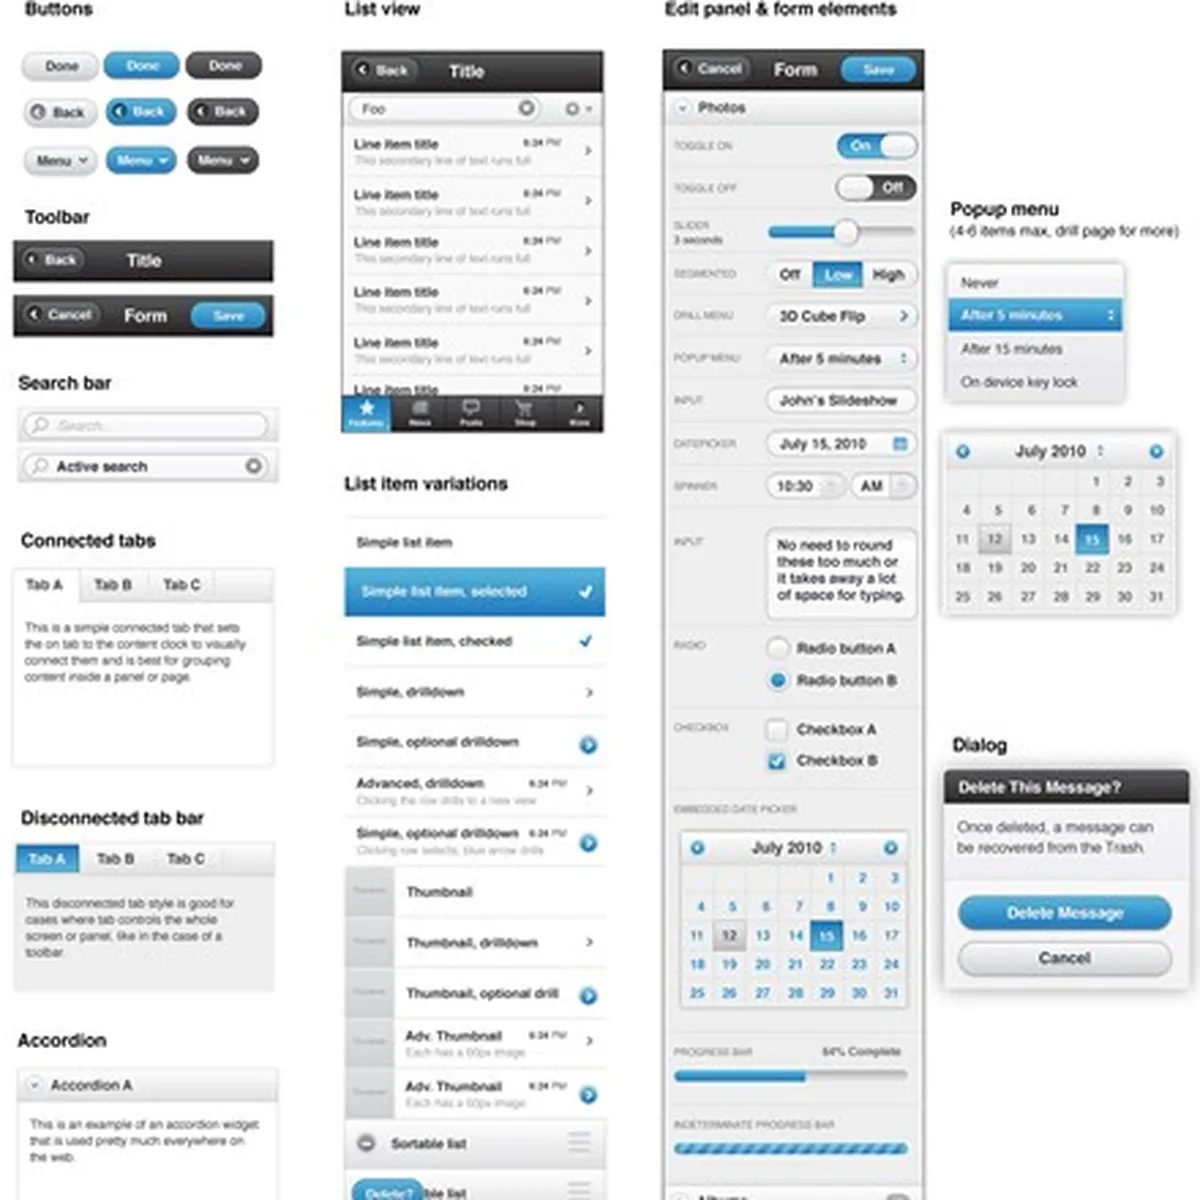 JQuery Mobile Review